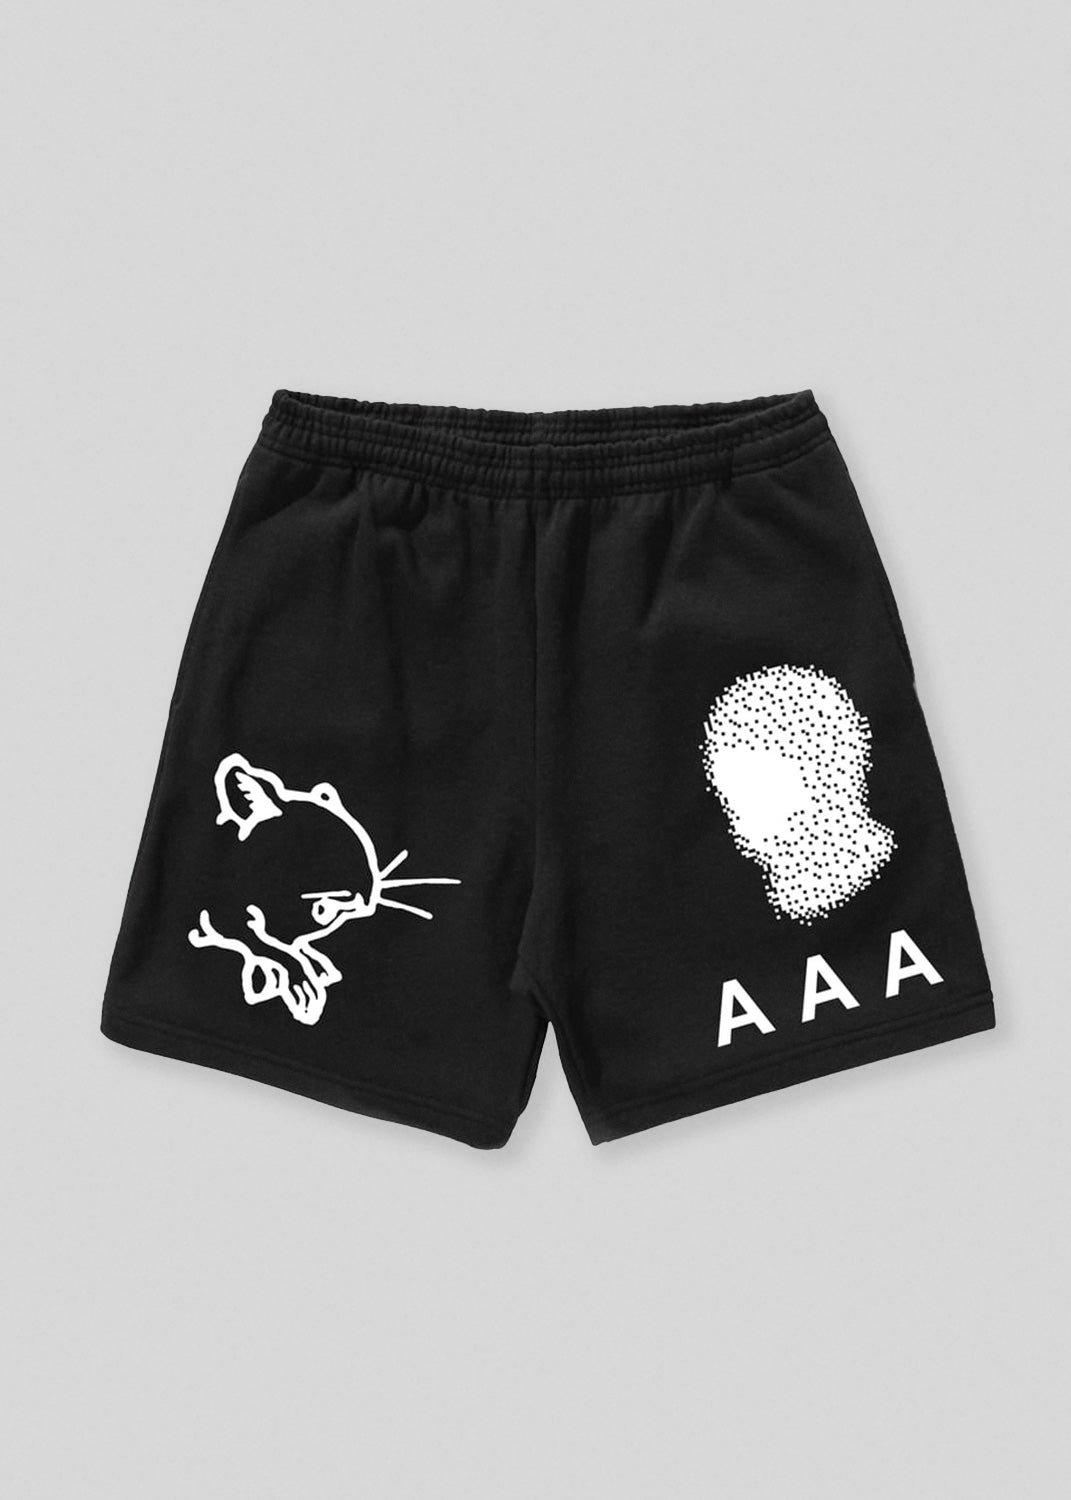 Ramps - Black AAA Shorts | 1032 SPACE